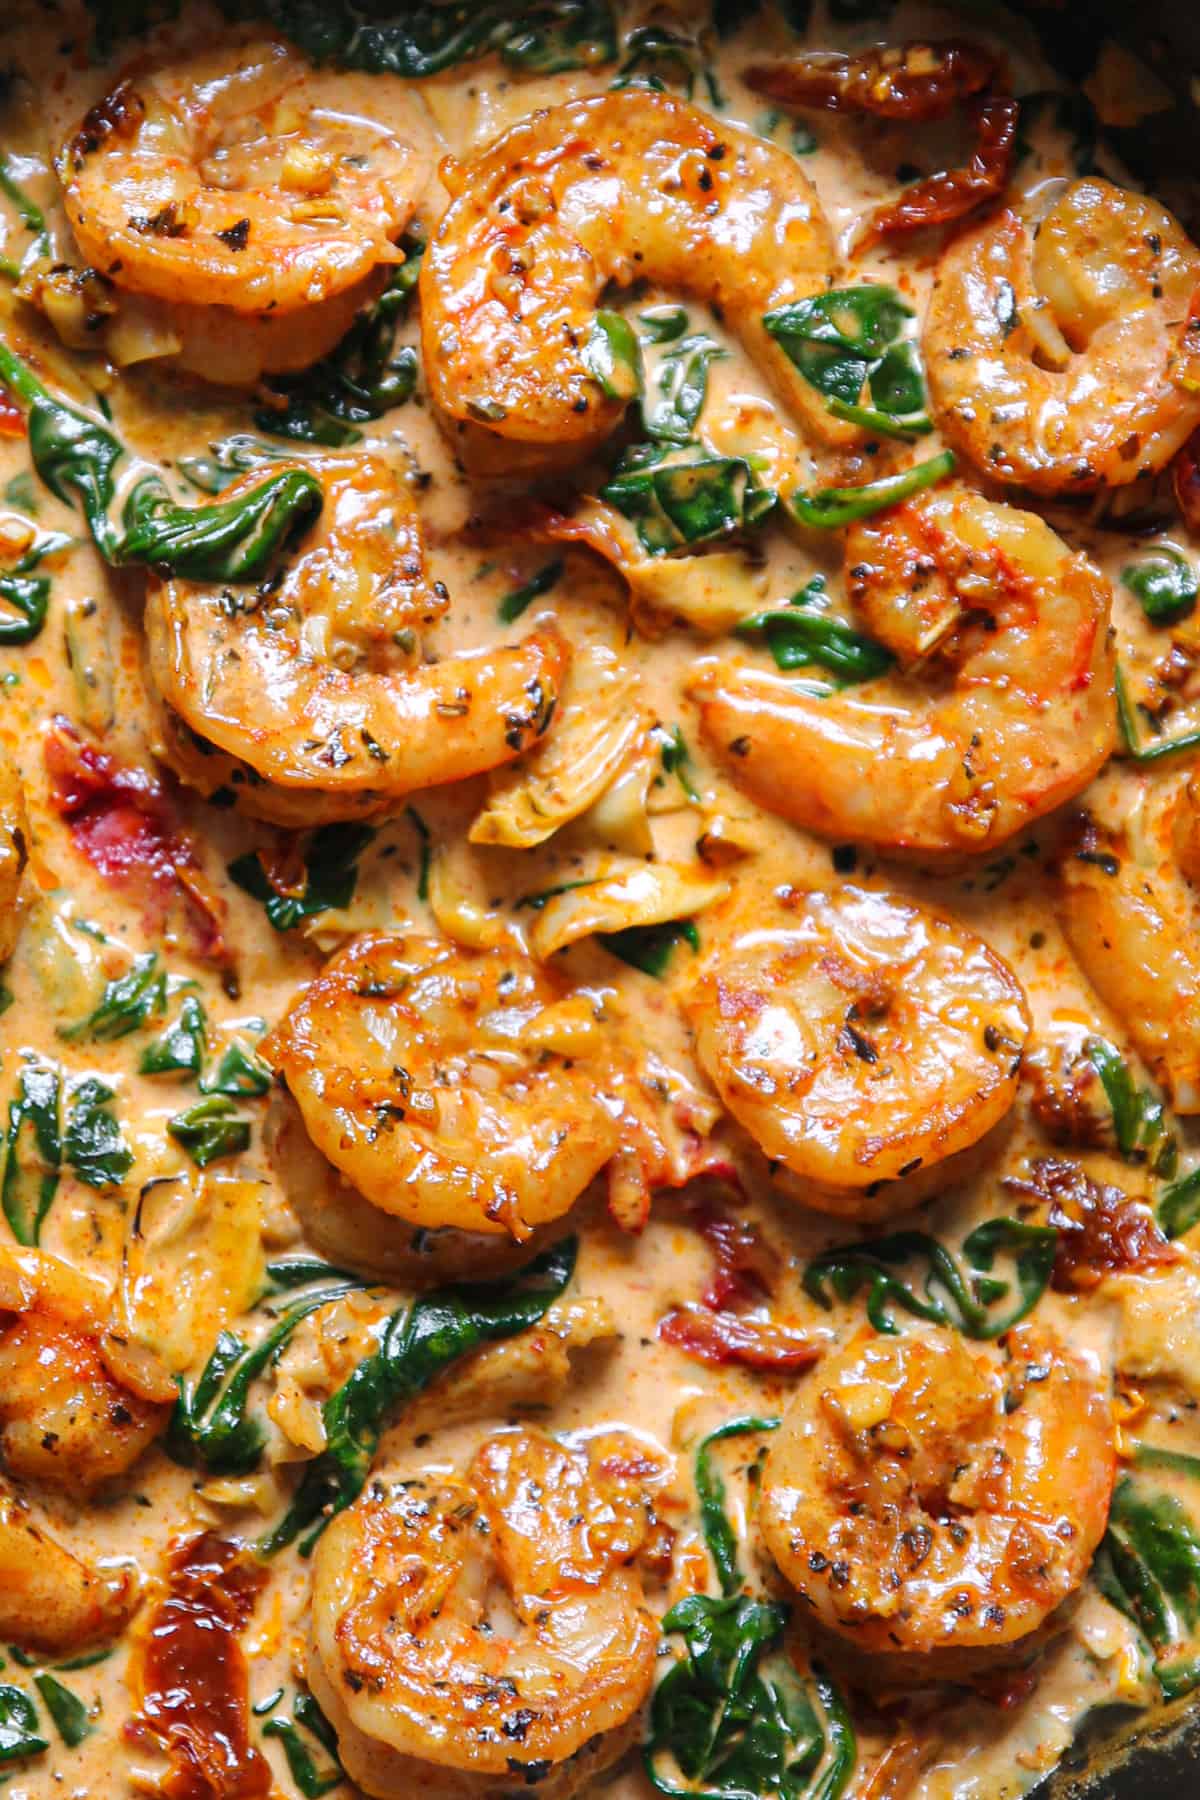 Creamy Tuscan Shrimp with Sun-Dried Tomatoes, Spinach, and Artichokes - close-up photo.